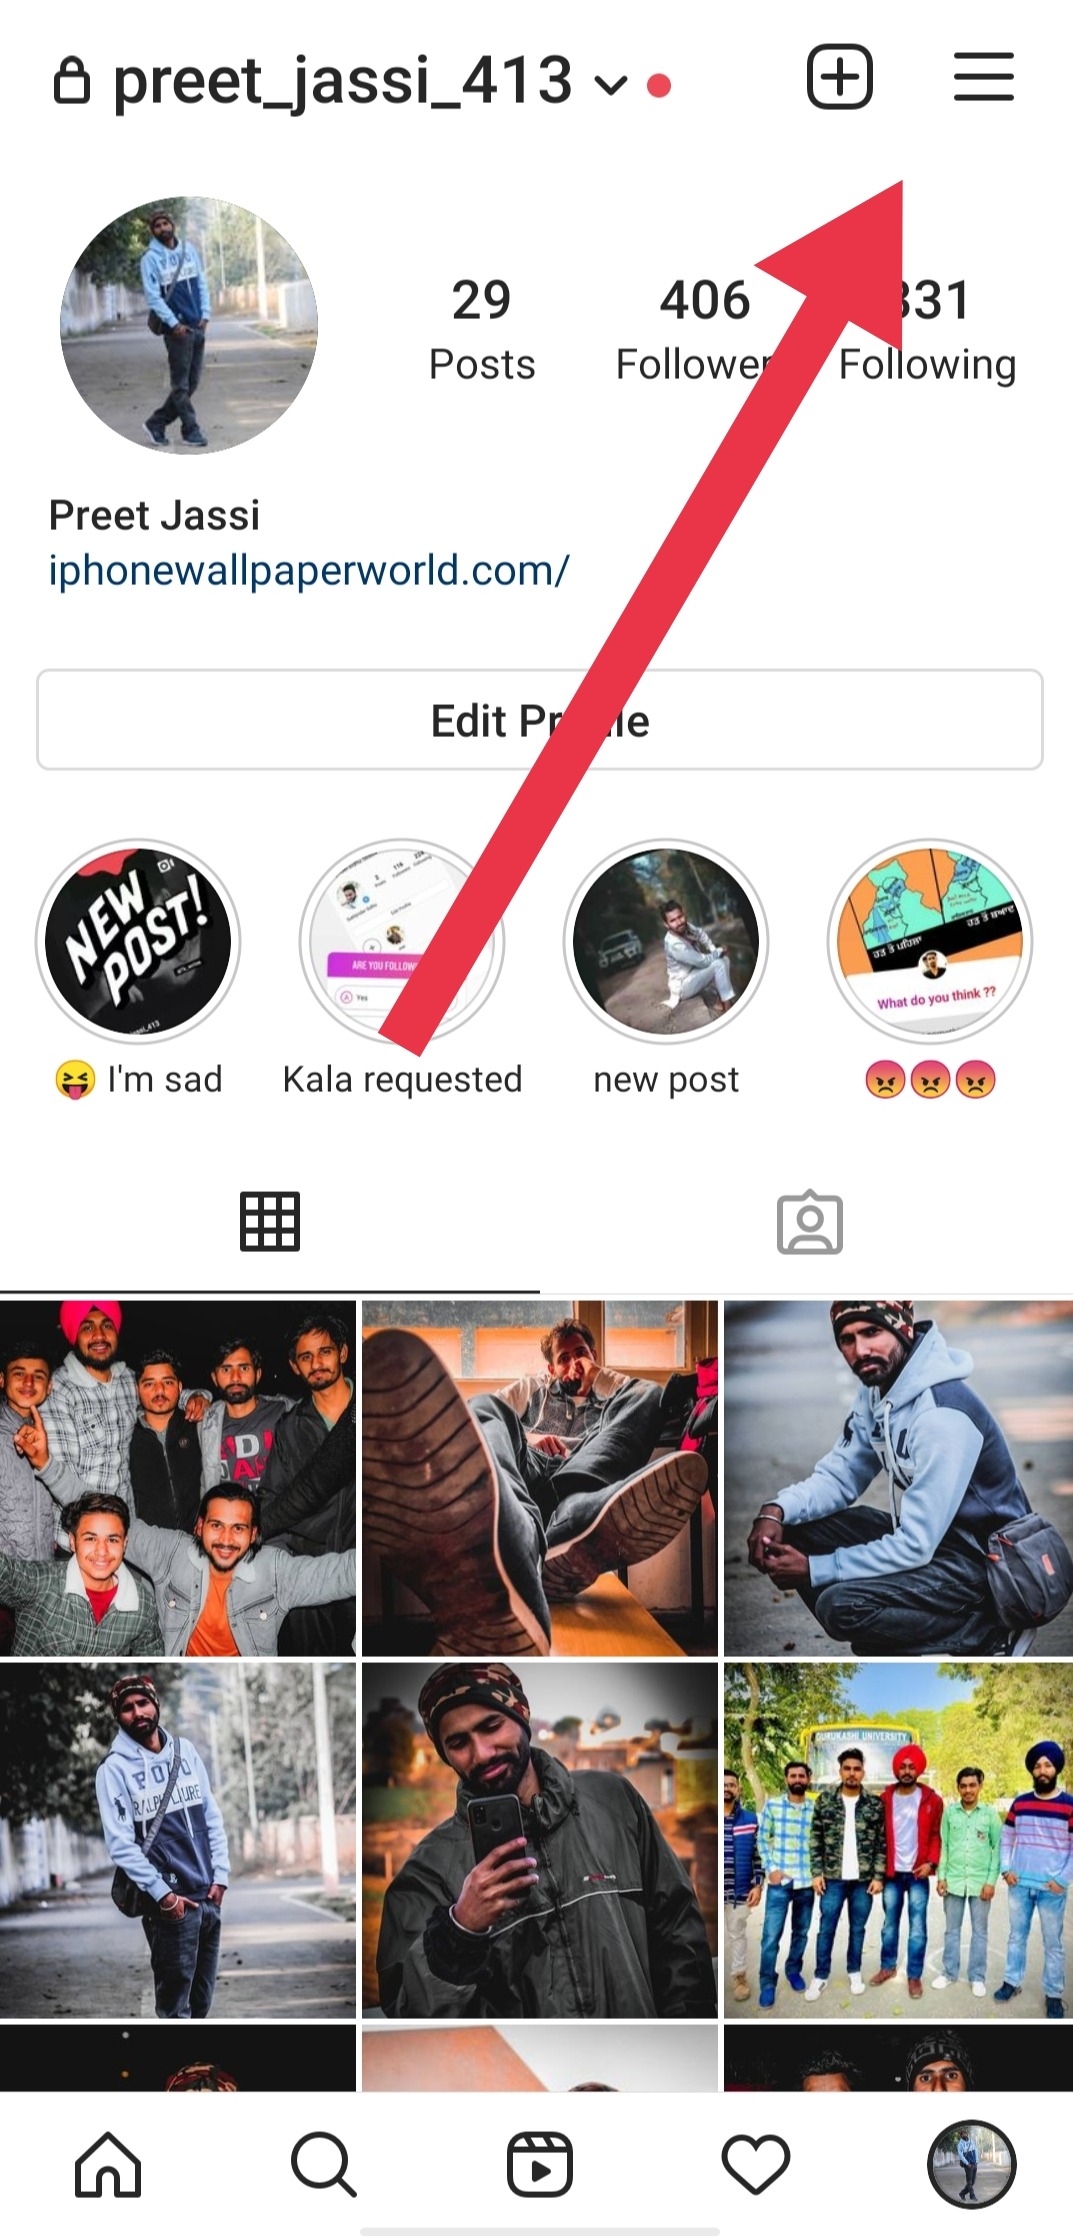 How To Clear/Delete Instagram Search Suggestions